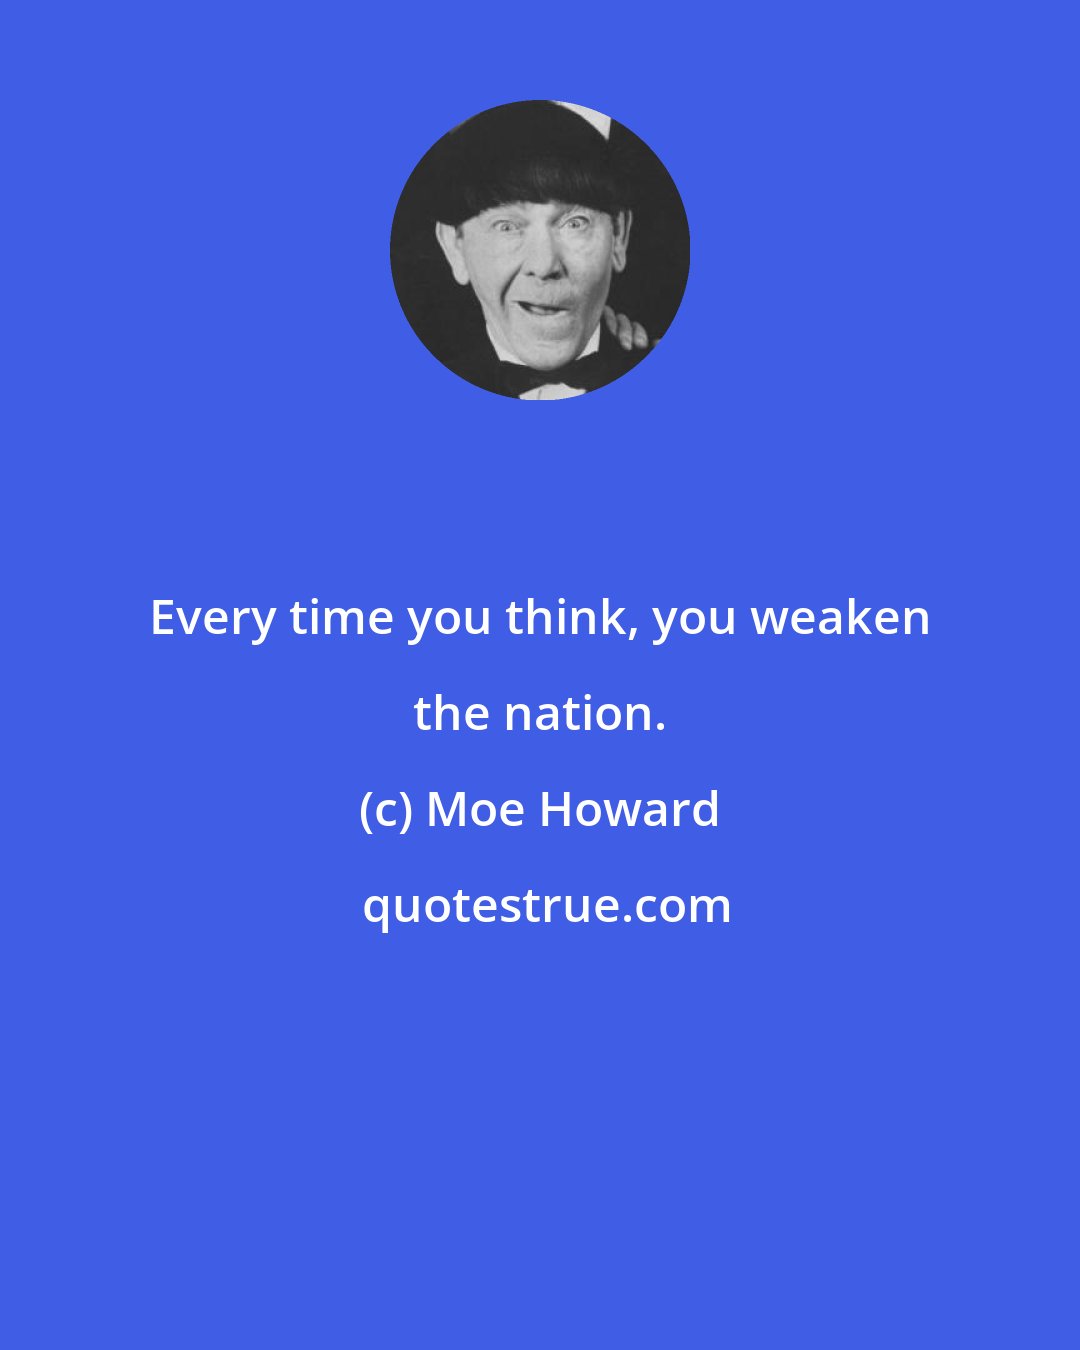 Moe Howard: Every time you think, you weaken the nation.